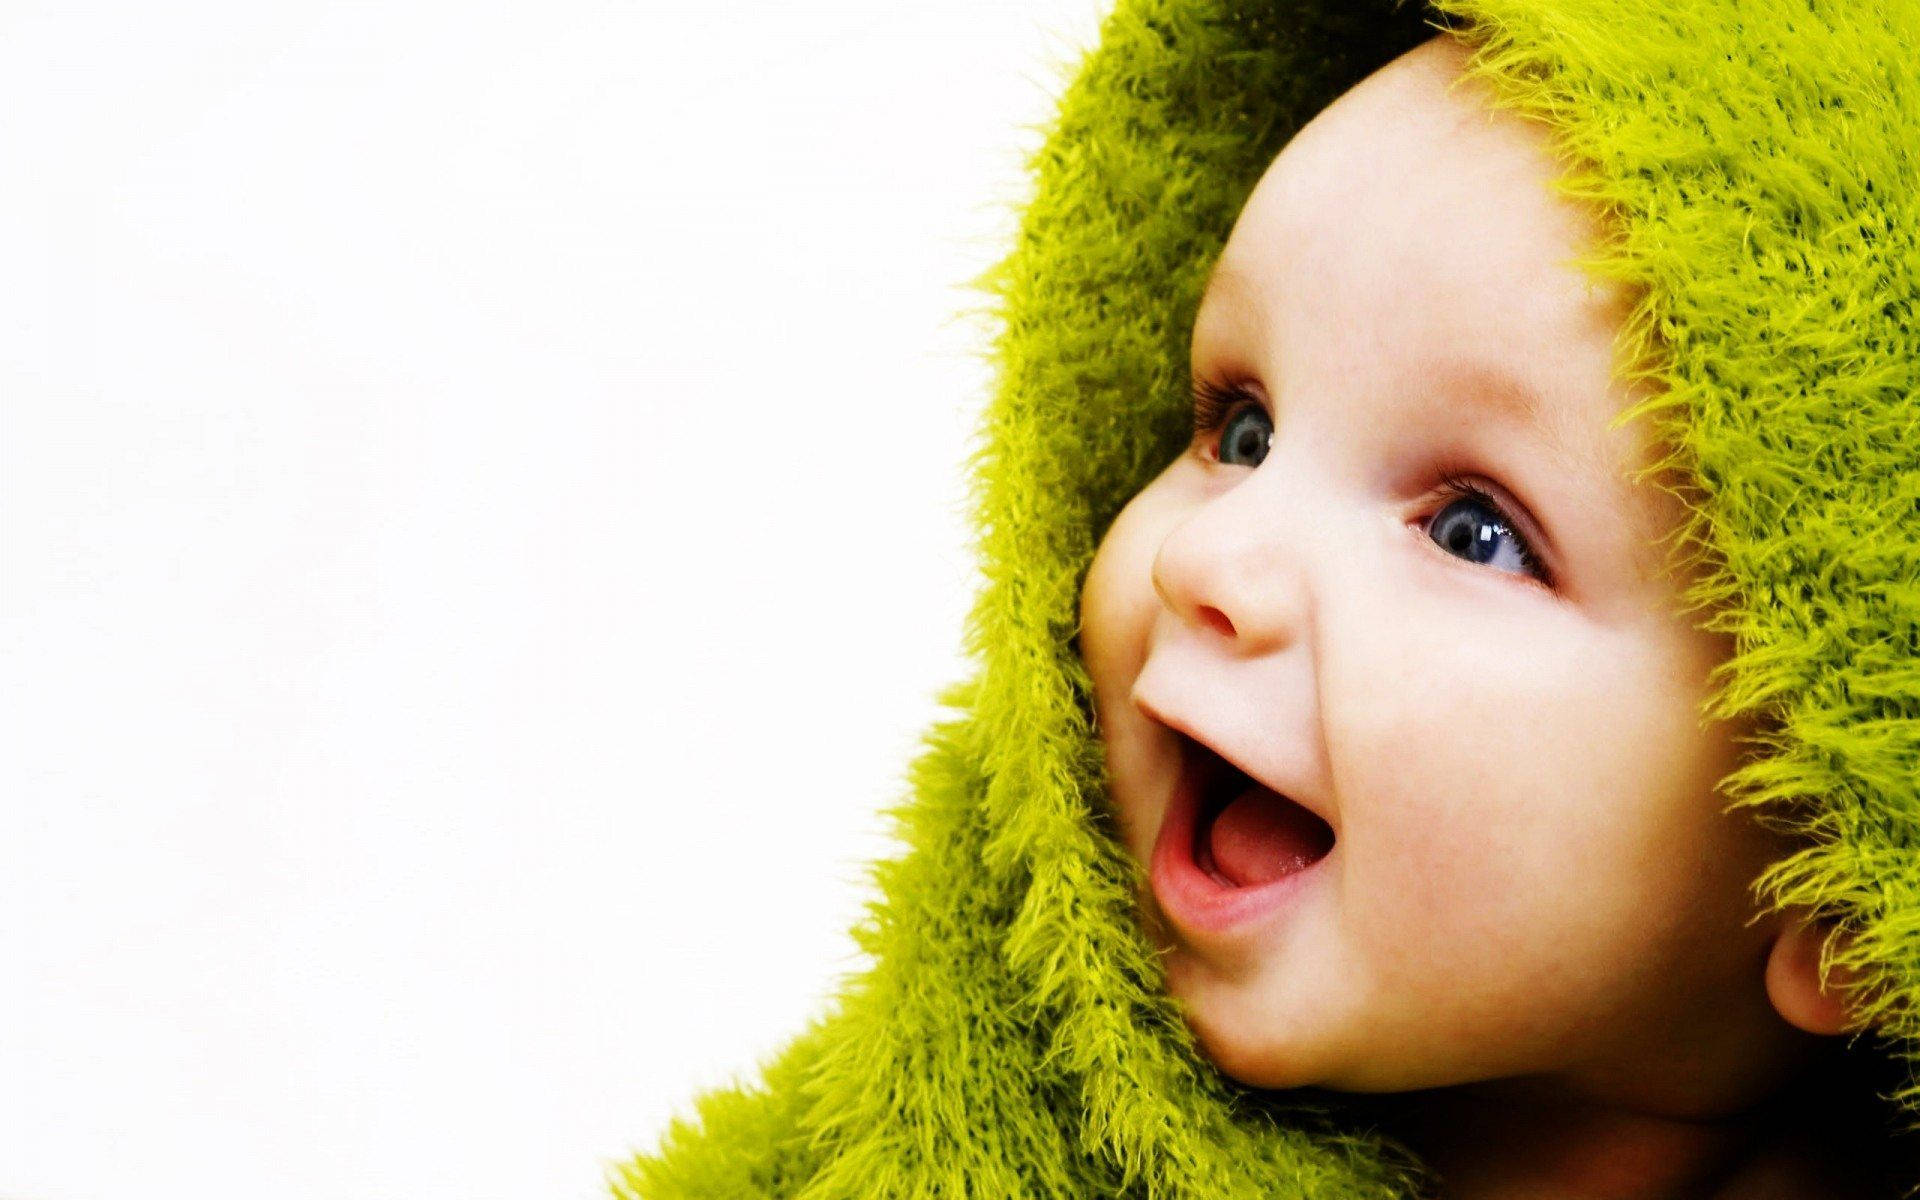 Free Baby Boy Wallpaper Downloads, [100+] Baby Boy Wallpapers for FREE |  